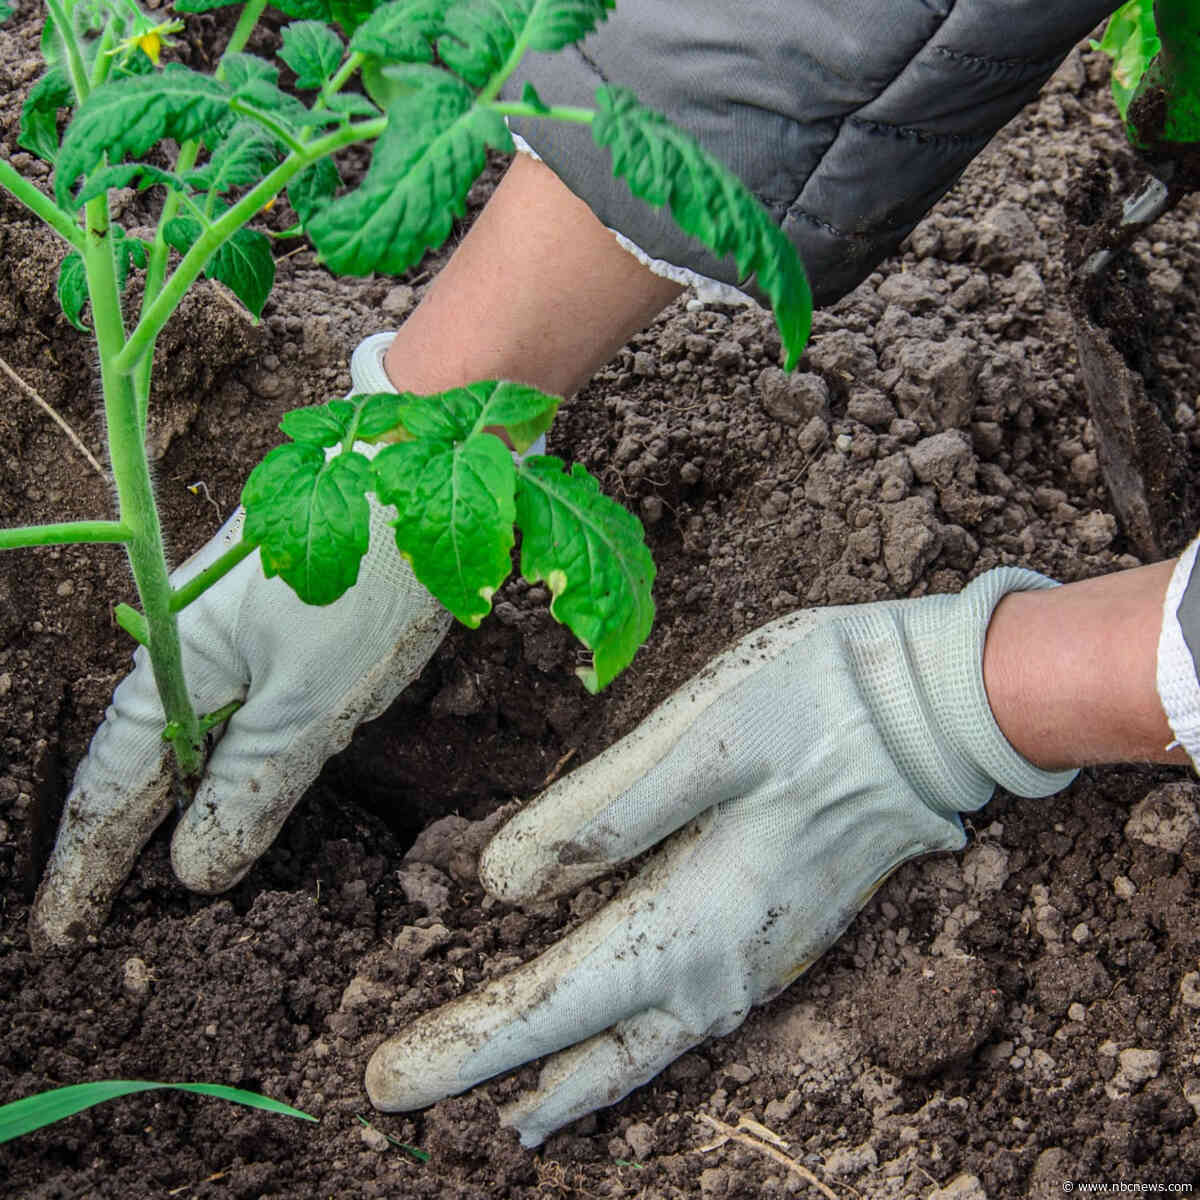 The best gardening gloves, according to experts